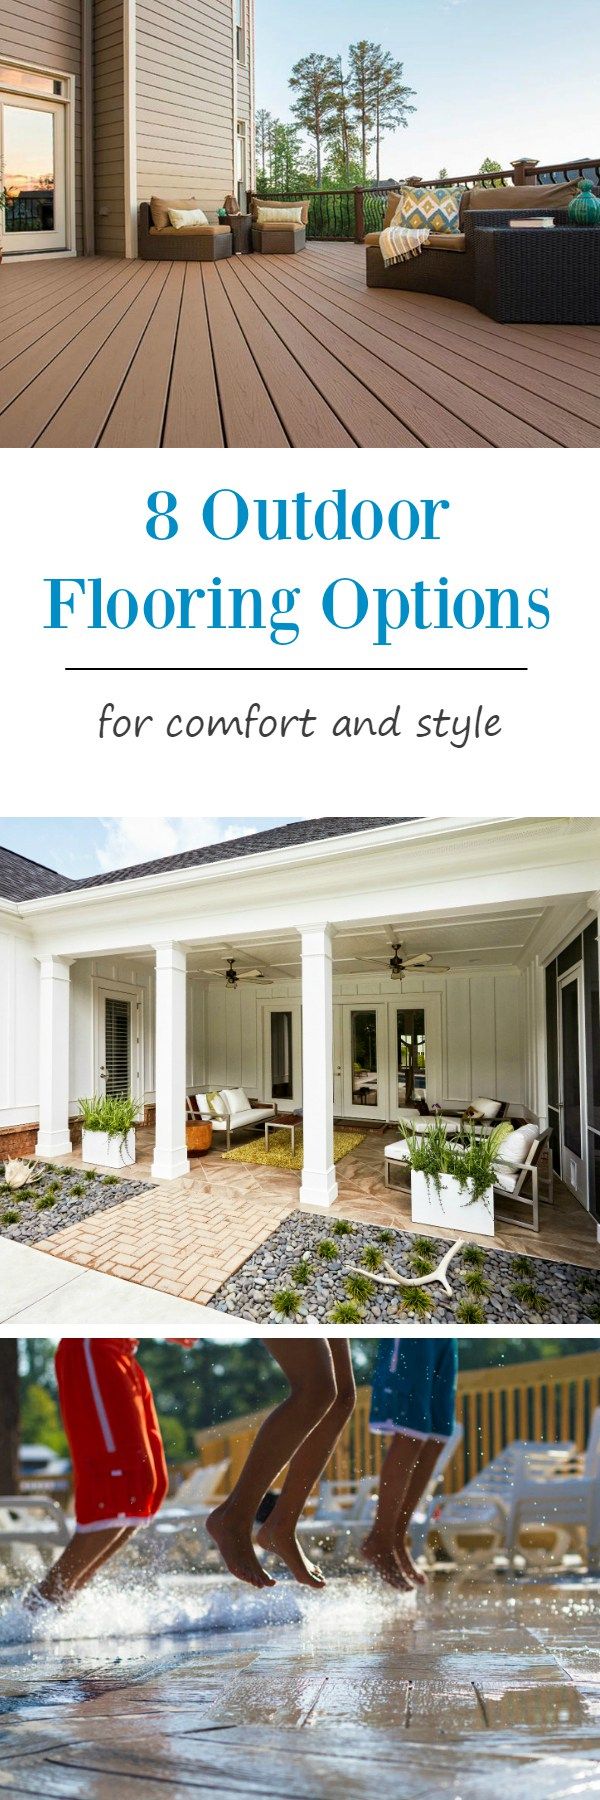 8 Outdoor Flooring Options for Style & Comfort